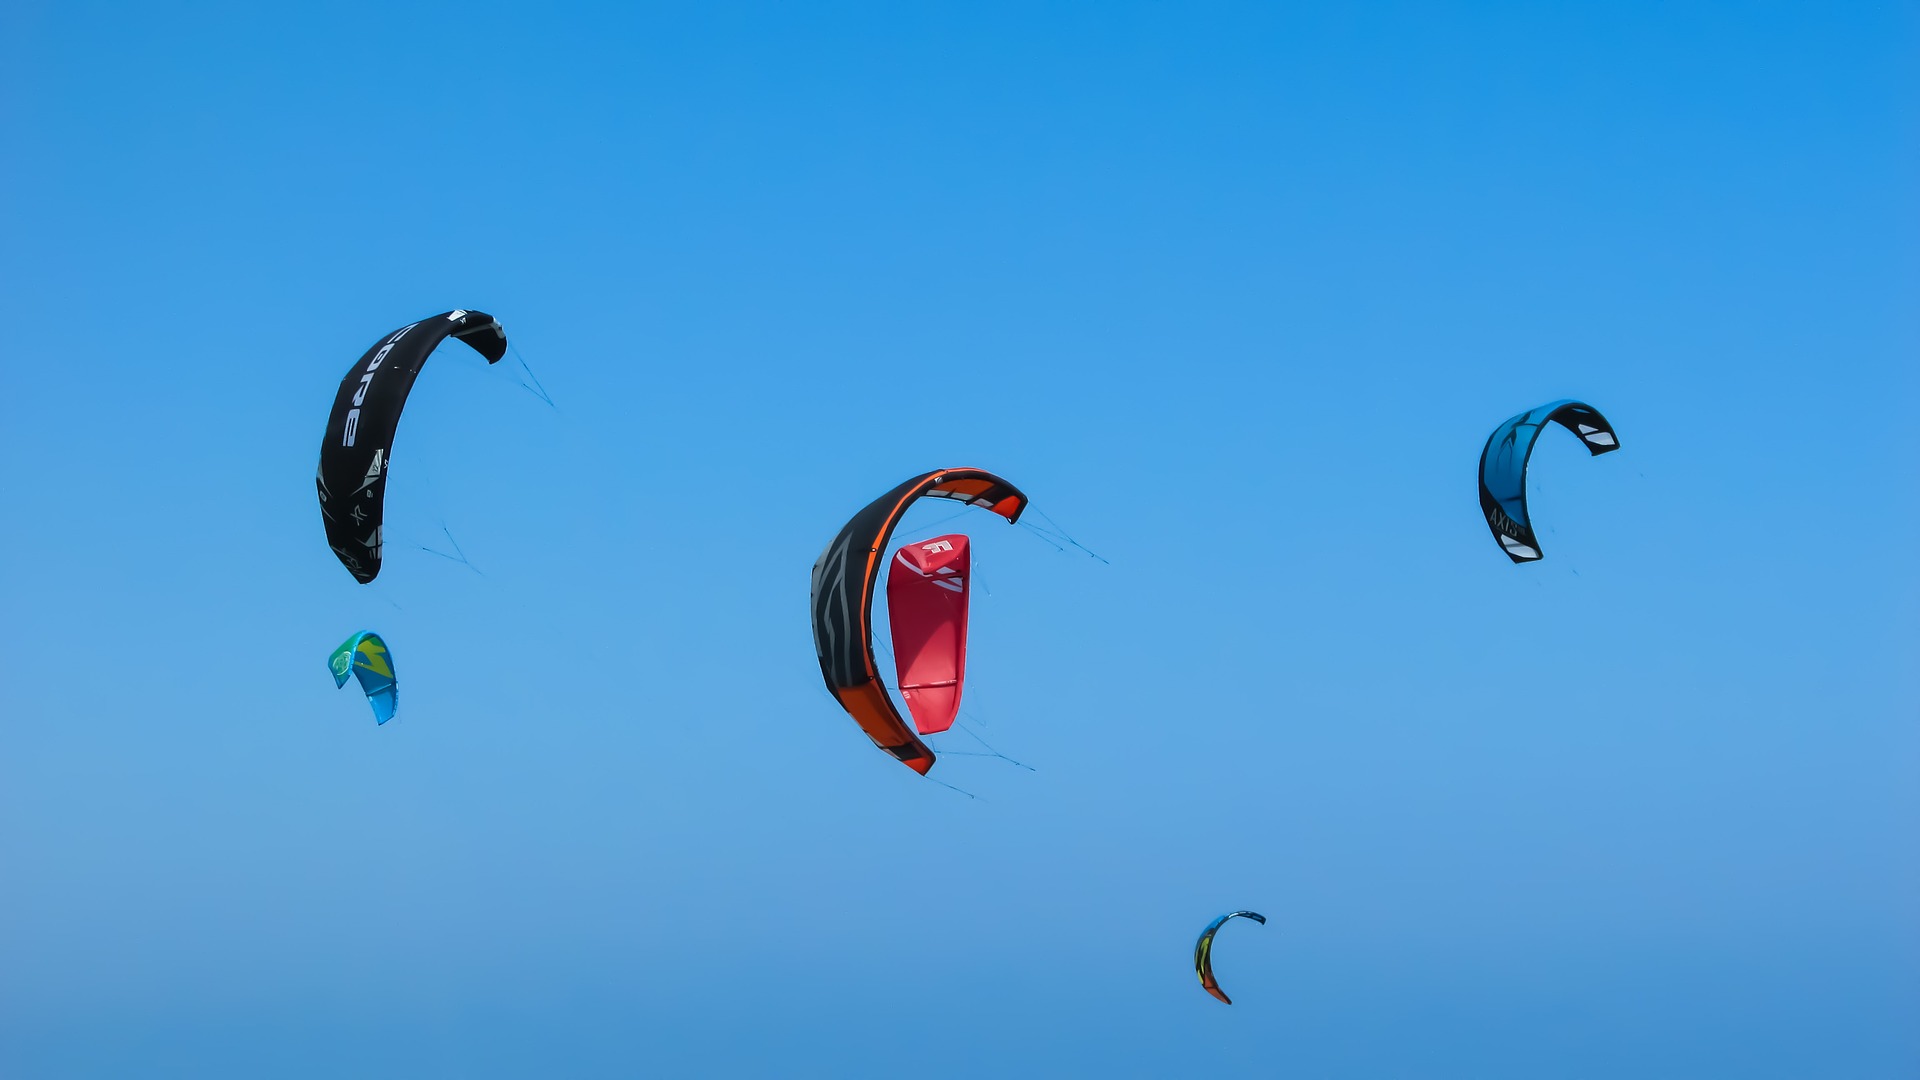 Kitesurfing Gear: A Comprehensive Guide to the Right Equipment - Kitemarkt